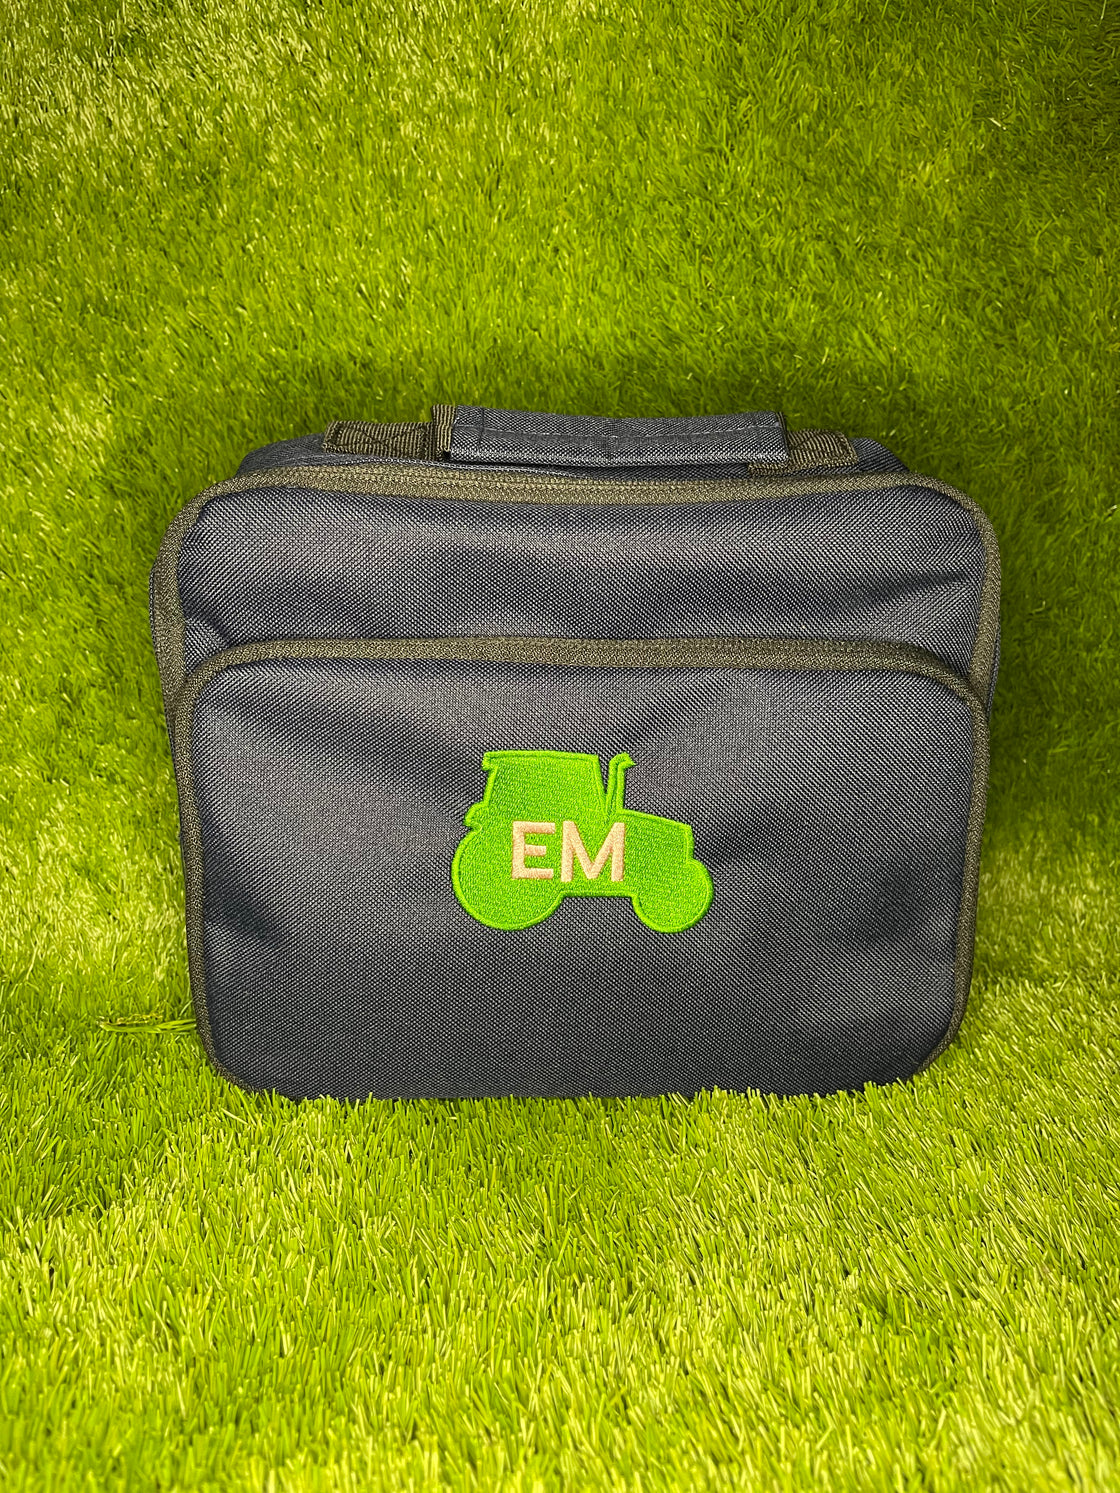 Lunchbox Bag with Tractor Embroidery